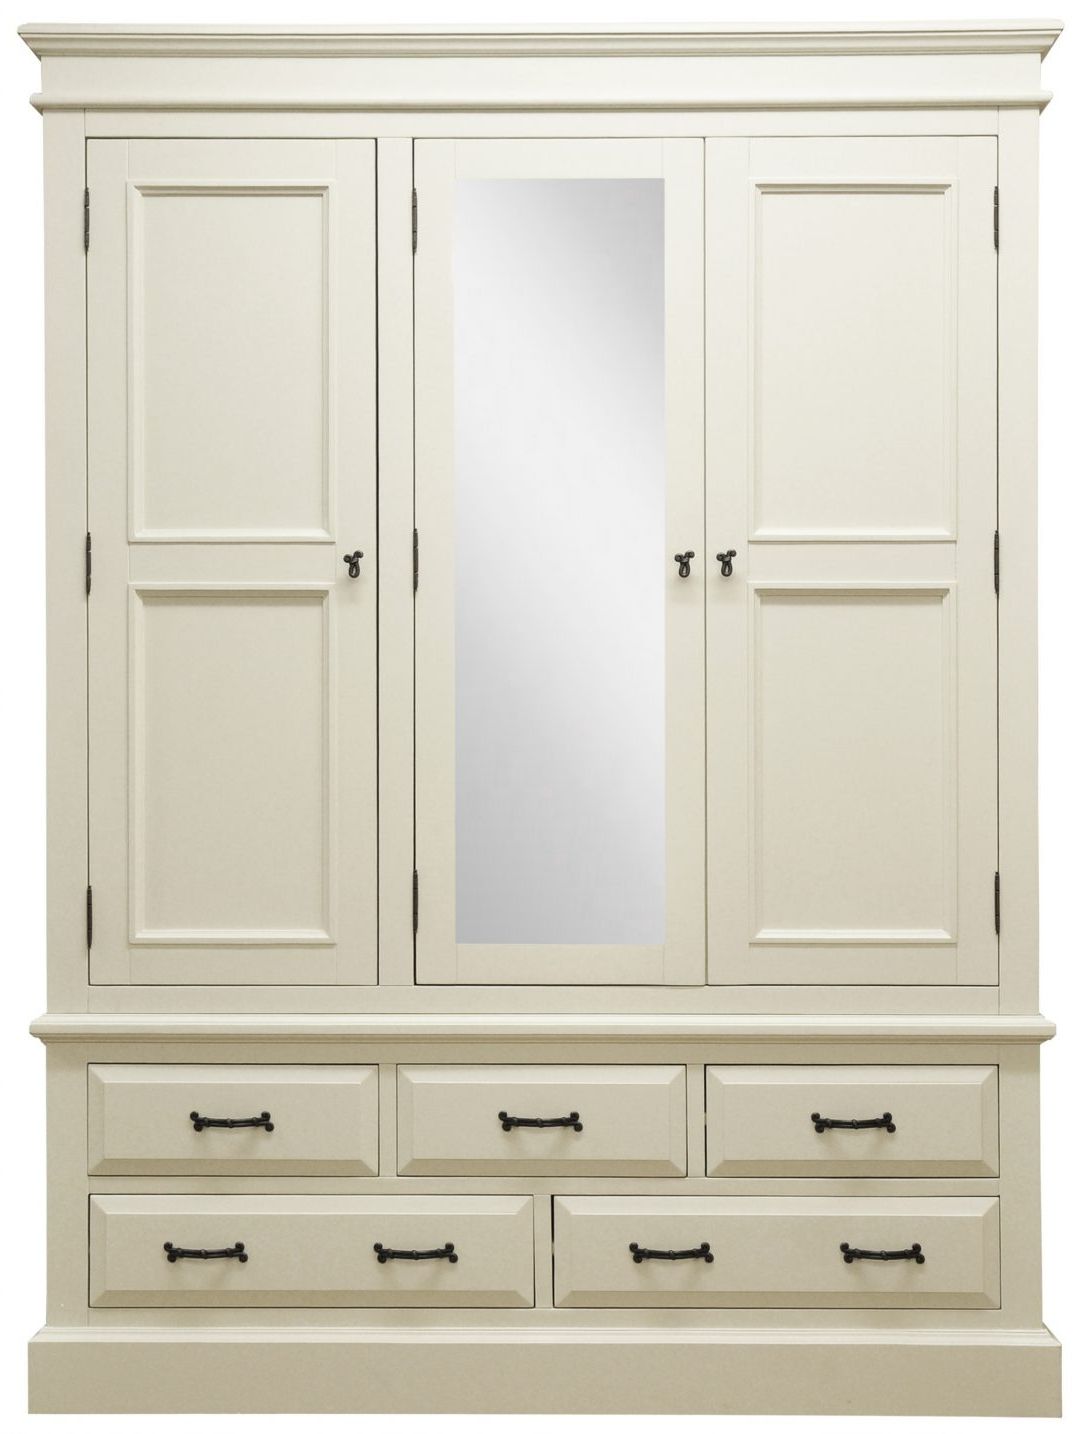 Well Known White Wardrobes With Mirror Double Wardrobe Mirrored Sliding Doors Within Wardrobes With Mirror And Drawers (View 1 of 15)